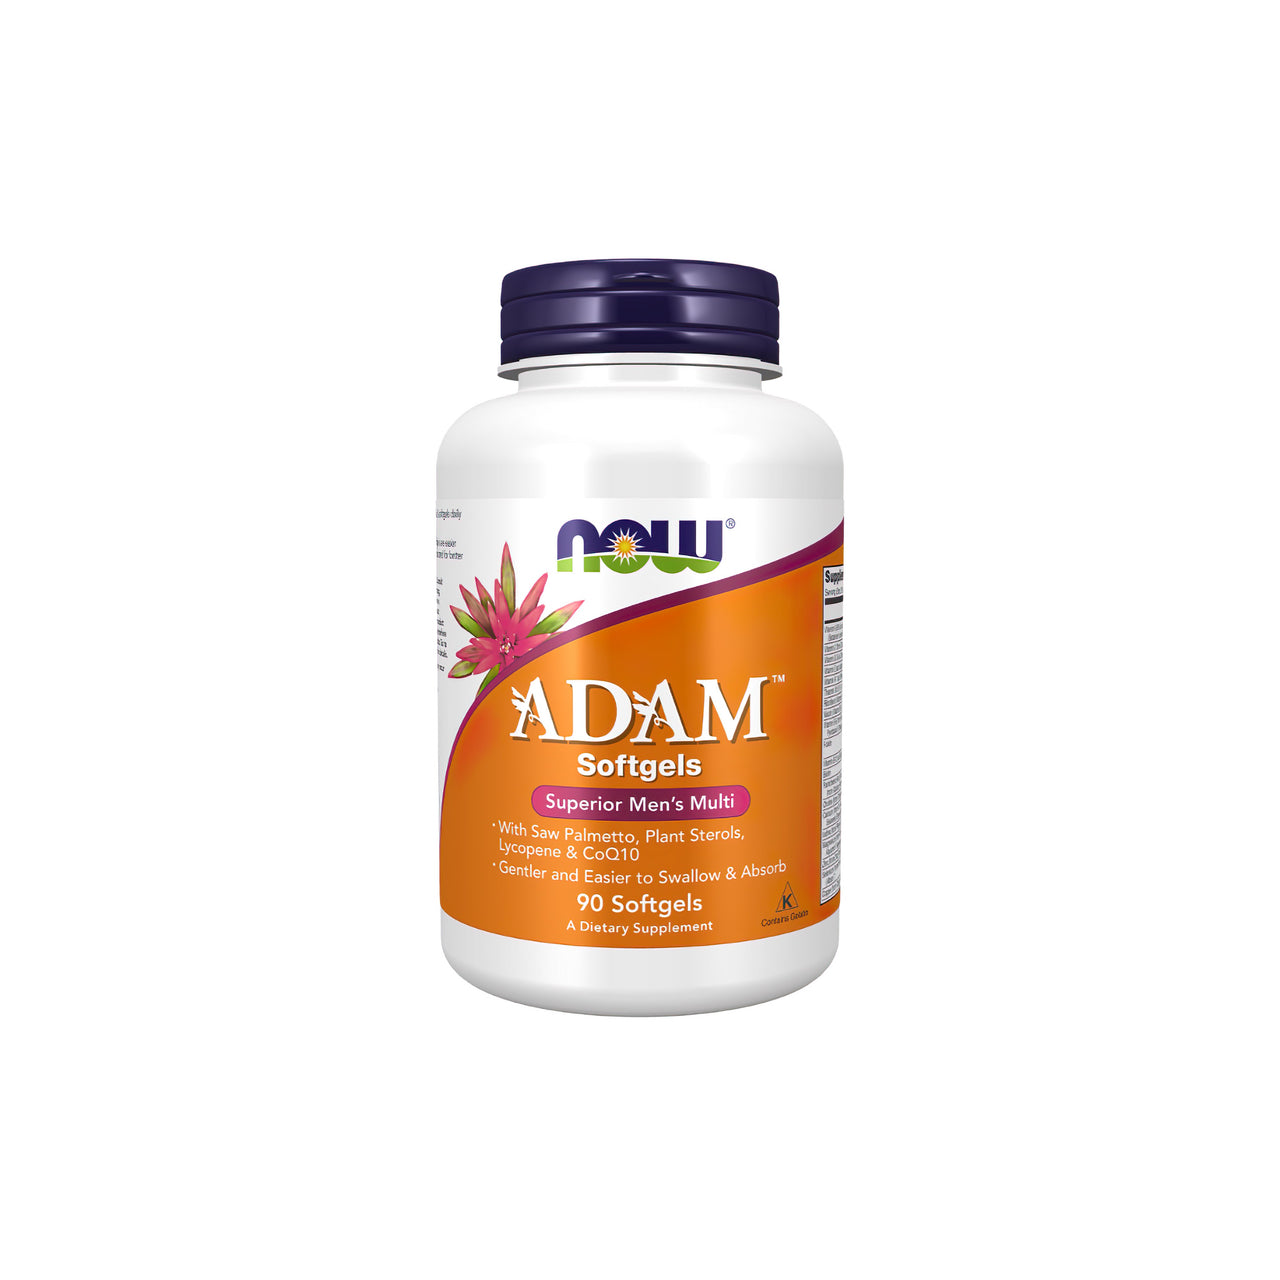 A bottle of Now Foods ADAM Multivitamins & Minerals for Man 90 sgel with vitamin c.